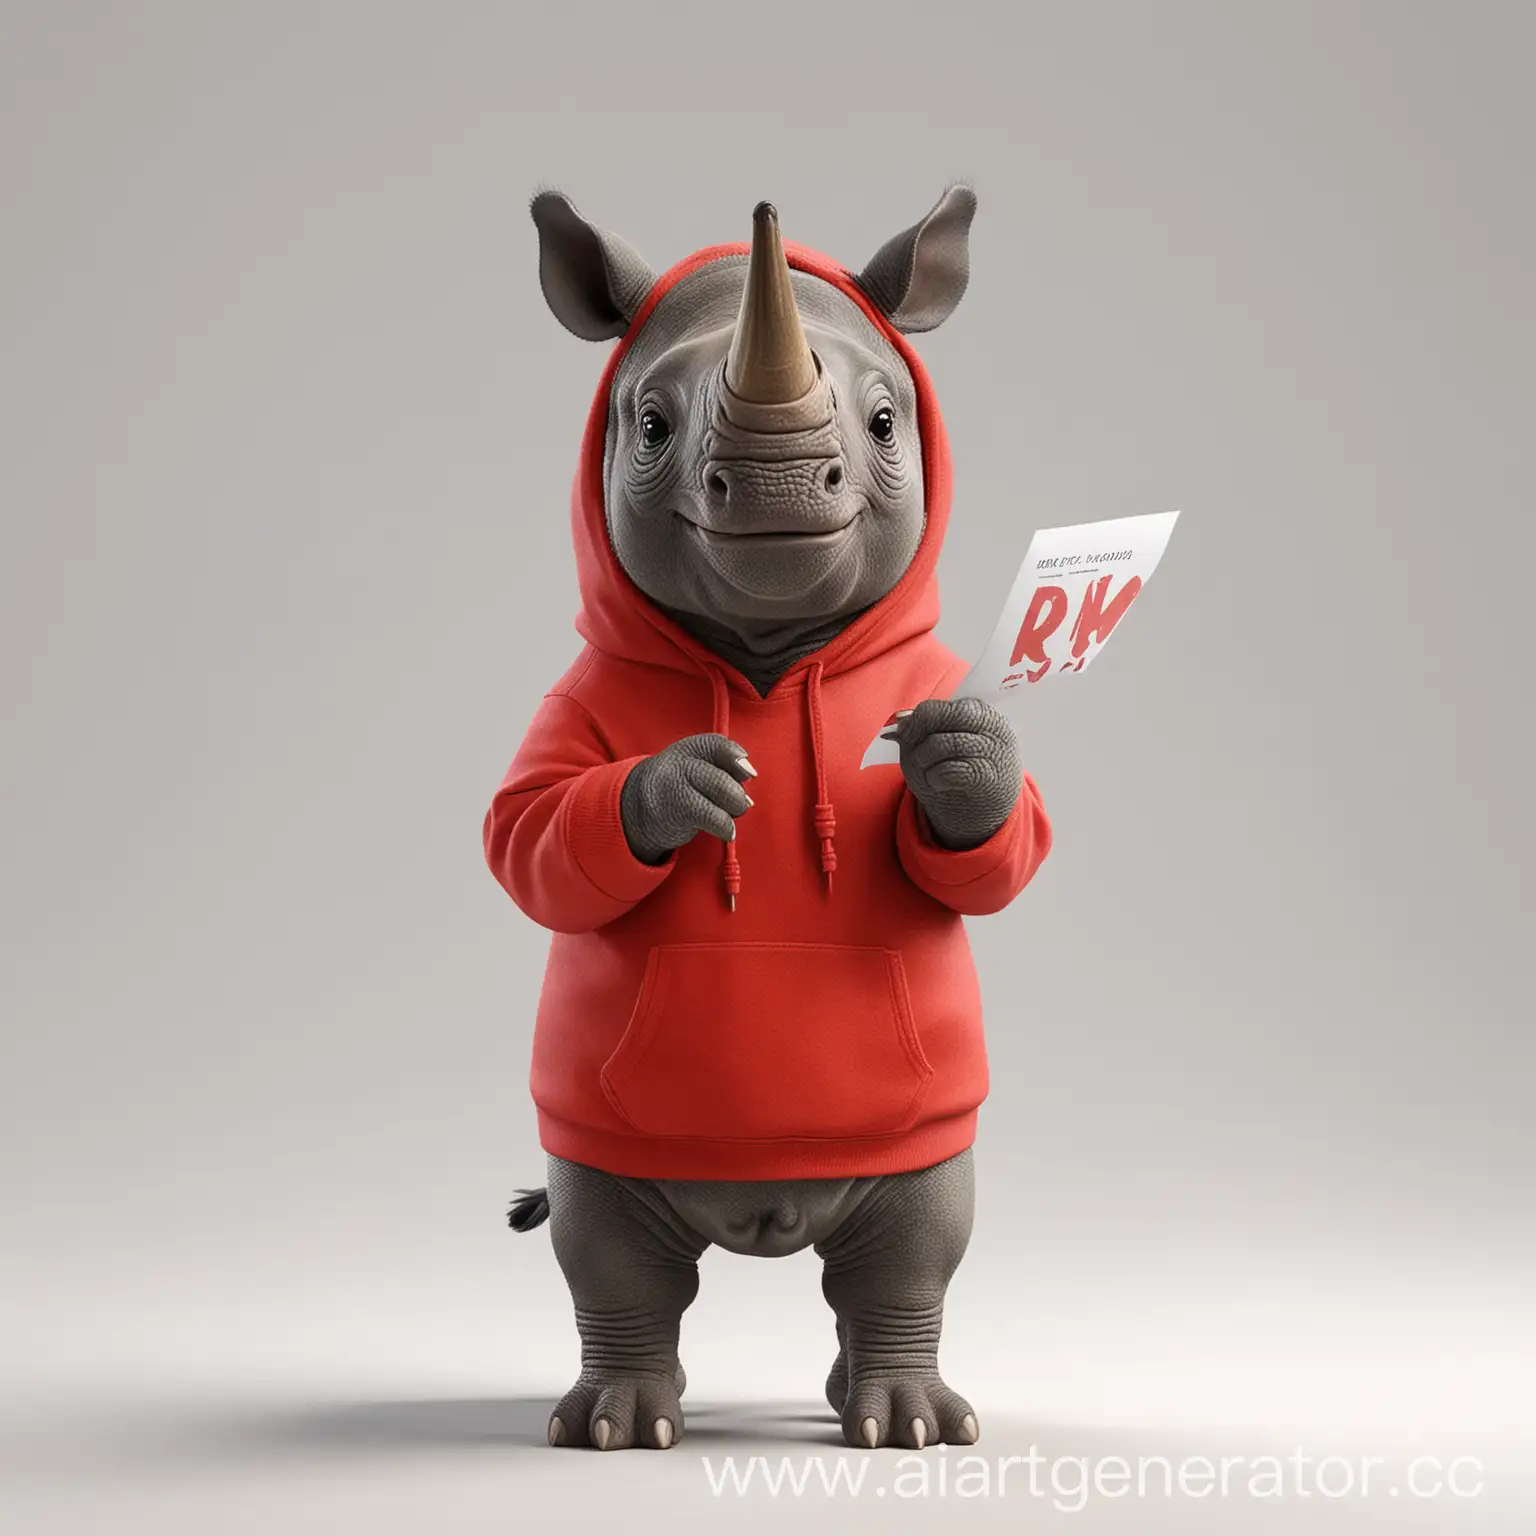 A cute little rhinoceros in a red hoodie, holding a letter in his hands, standing tall on a white background